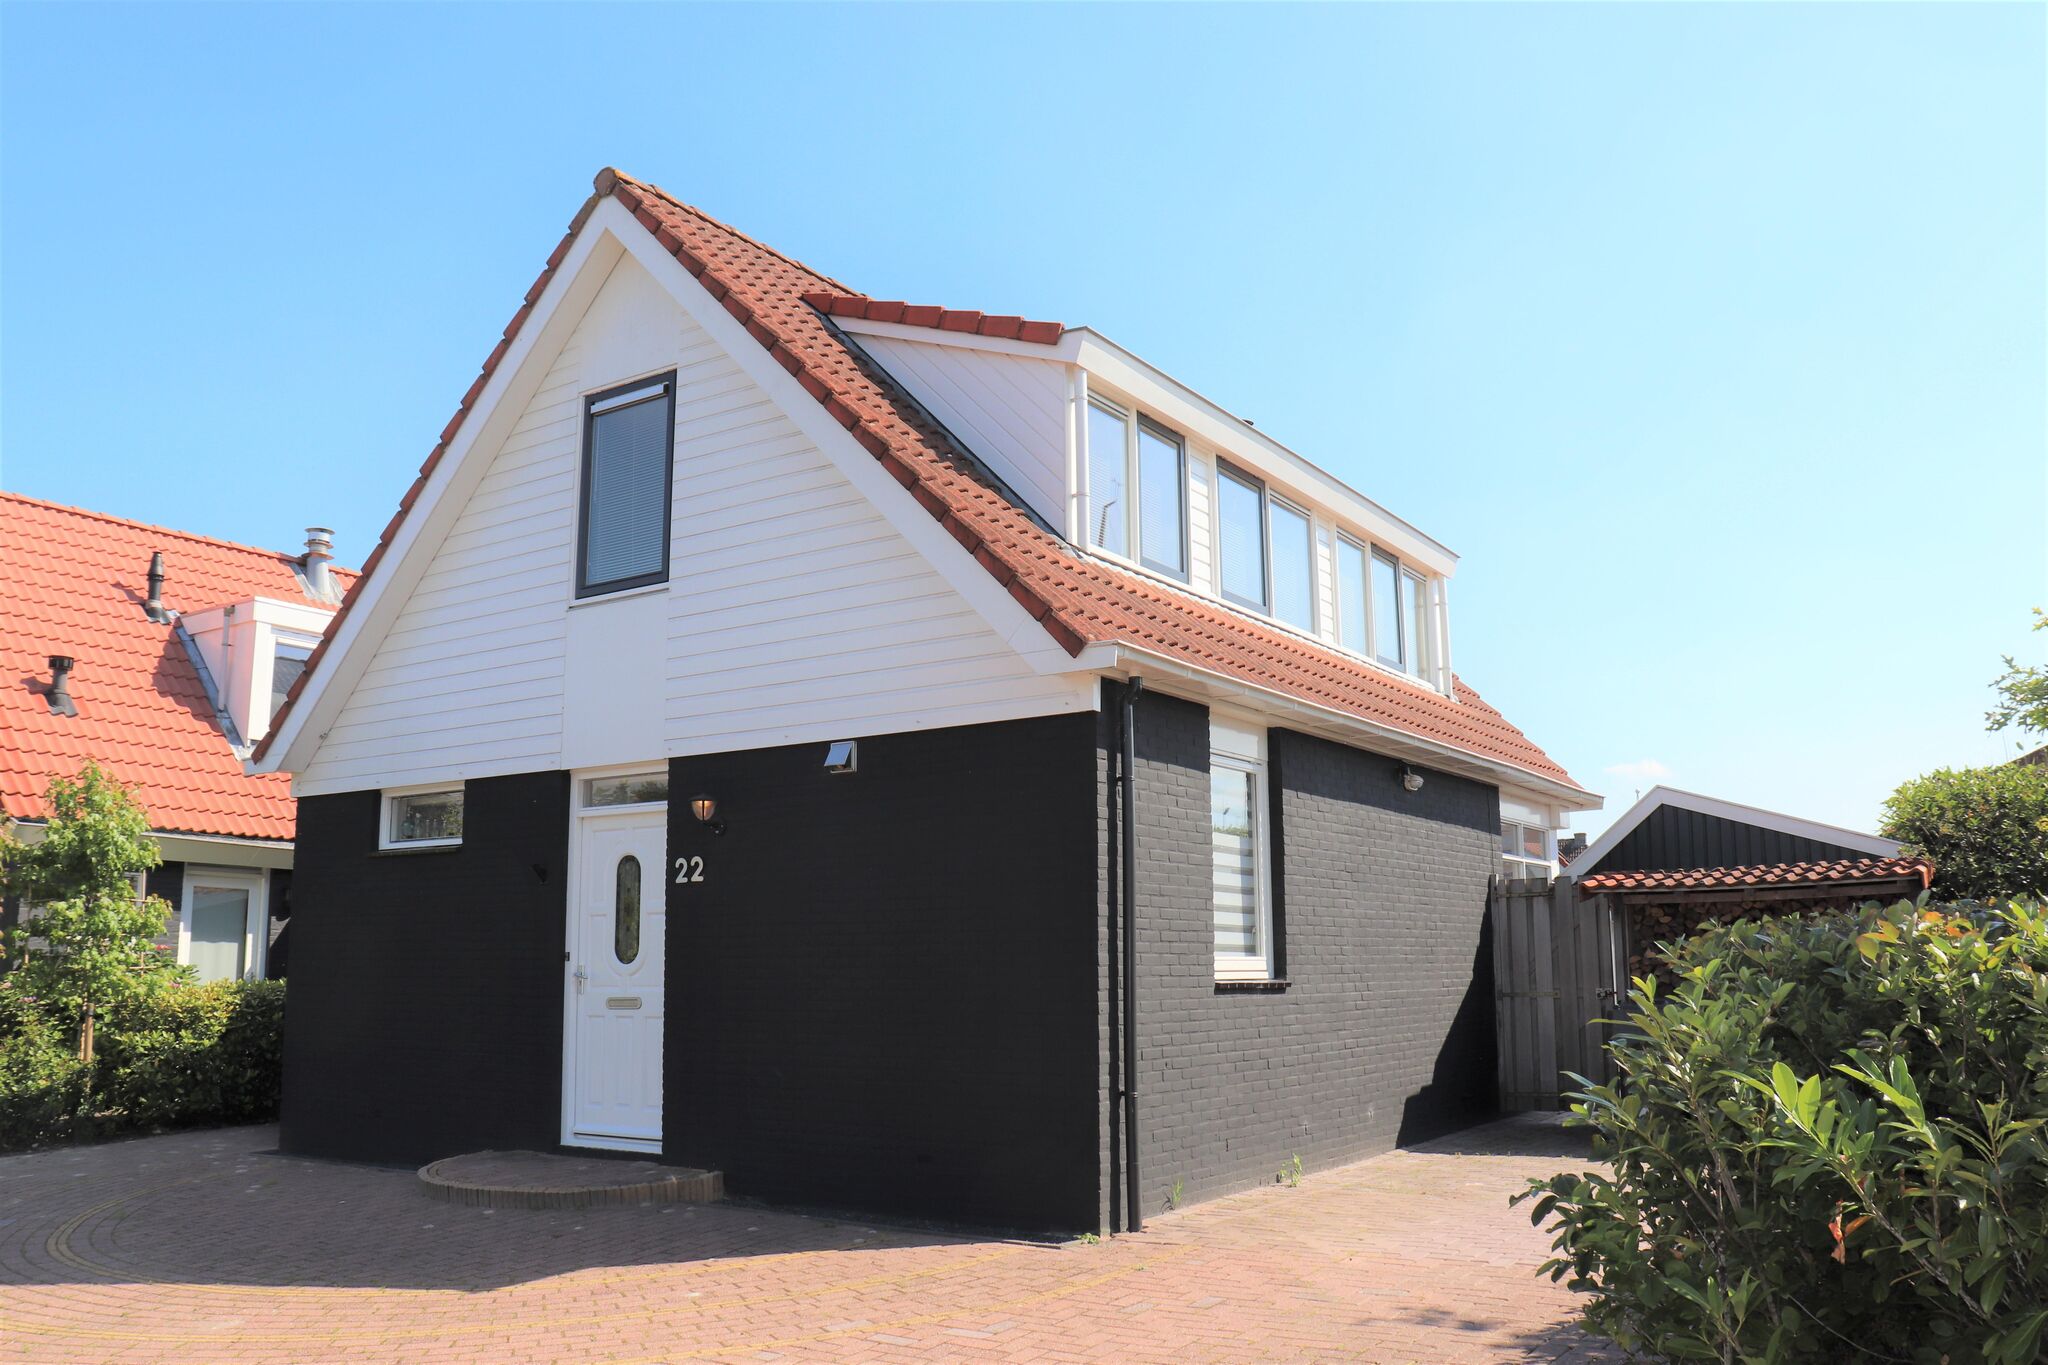 Detached vacation home in Friesland